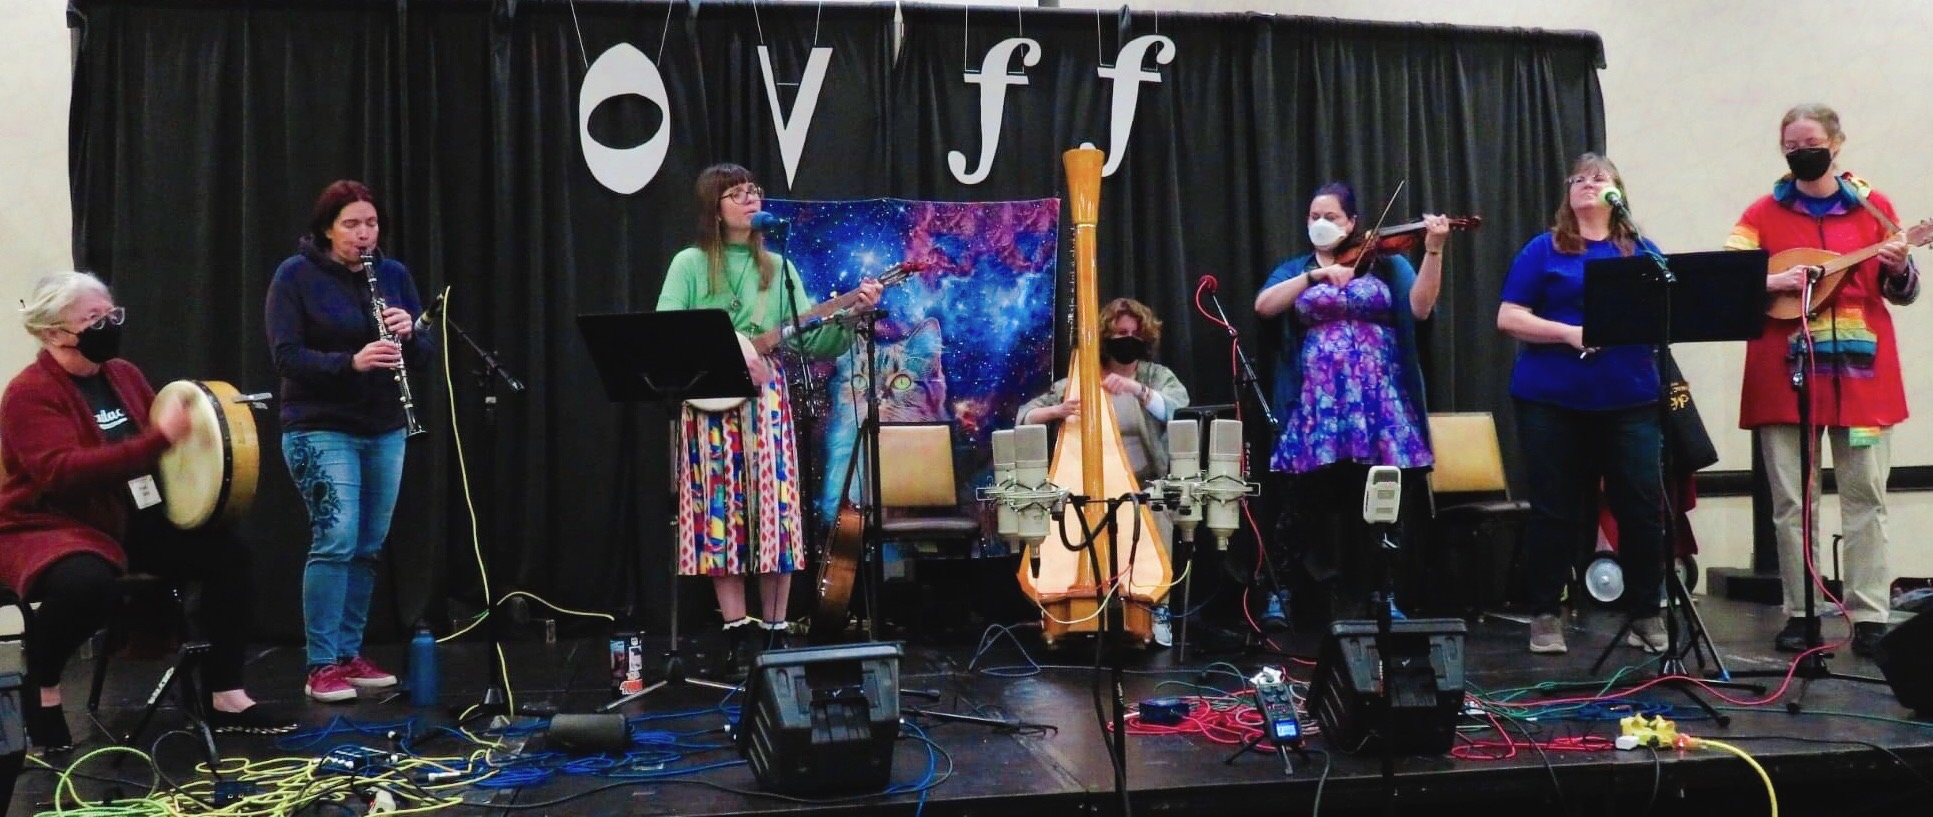 Seven women play as a band on stage; from the left, a woman with a red cardigan and white hair plays an Irish drum, an auburn-haired woman wearing jeans and a dark purple hoodie plays clarinet, a woman wearing a green long-sleeved shirt and multicolored skirt plays banjo and sings, a woman with short and wavy brown hair plays a big pedal harp, a woman with purple and blue hair in a matching dress plays violin, a brown-haired woman in a blue t-shirt and jeans looks up into the distance, and a tall woman in a red jacket with rainbow sleeves plays mandolin.